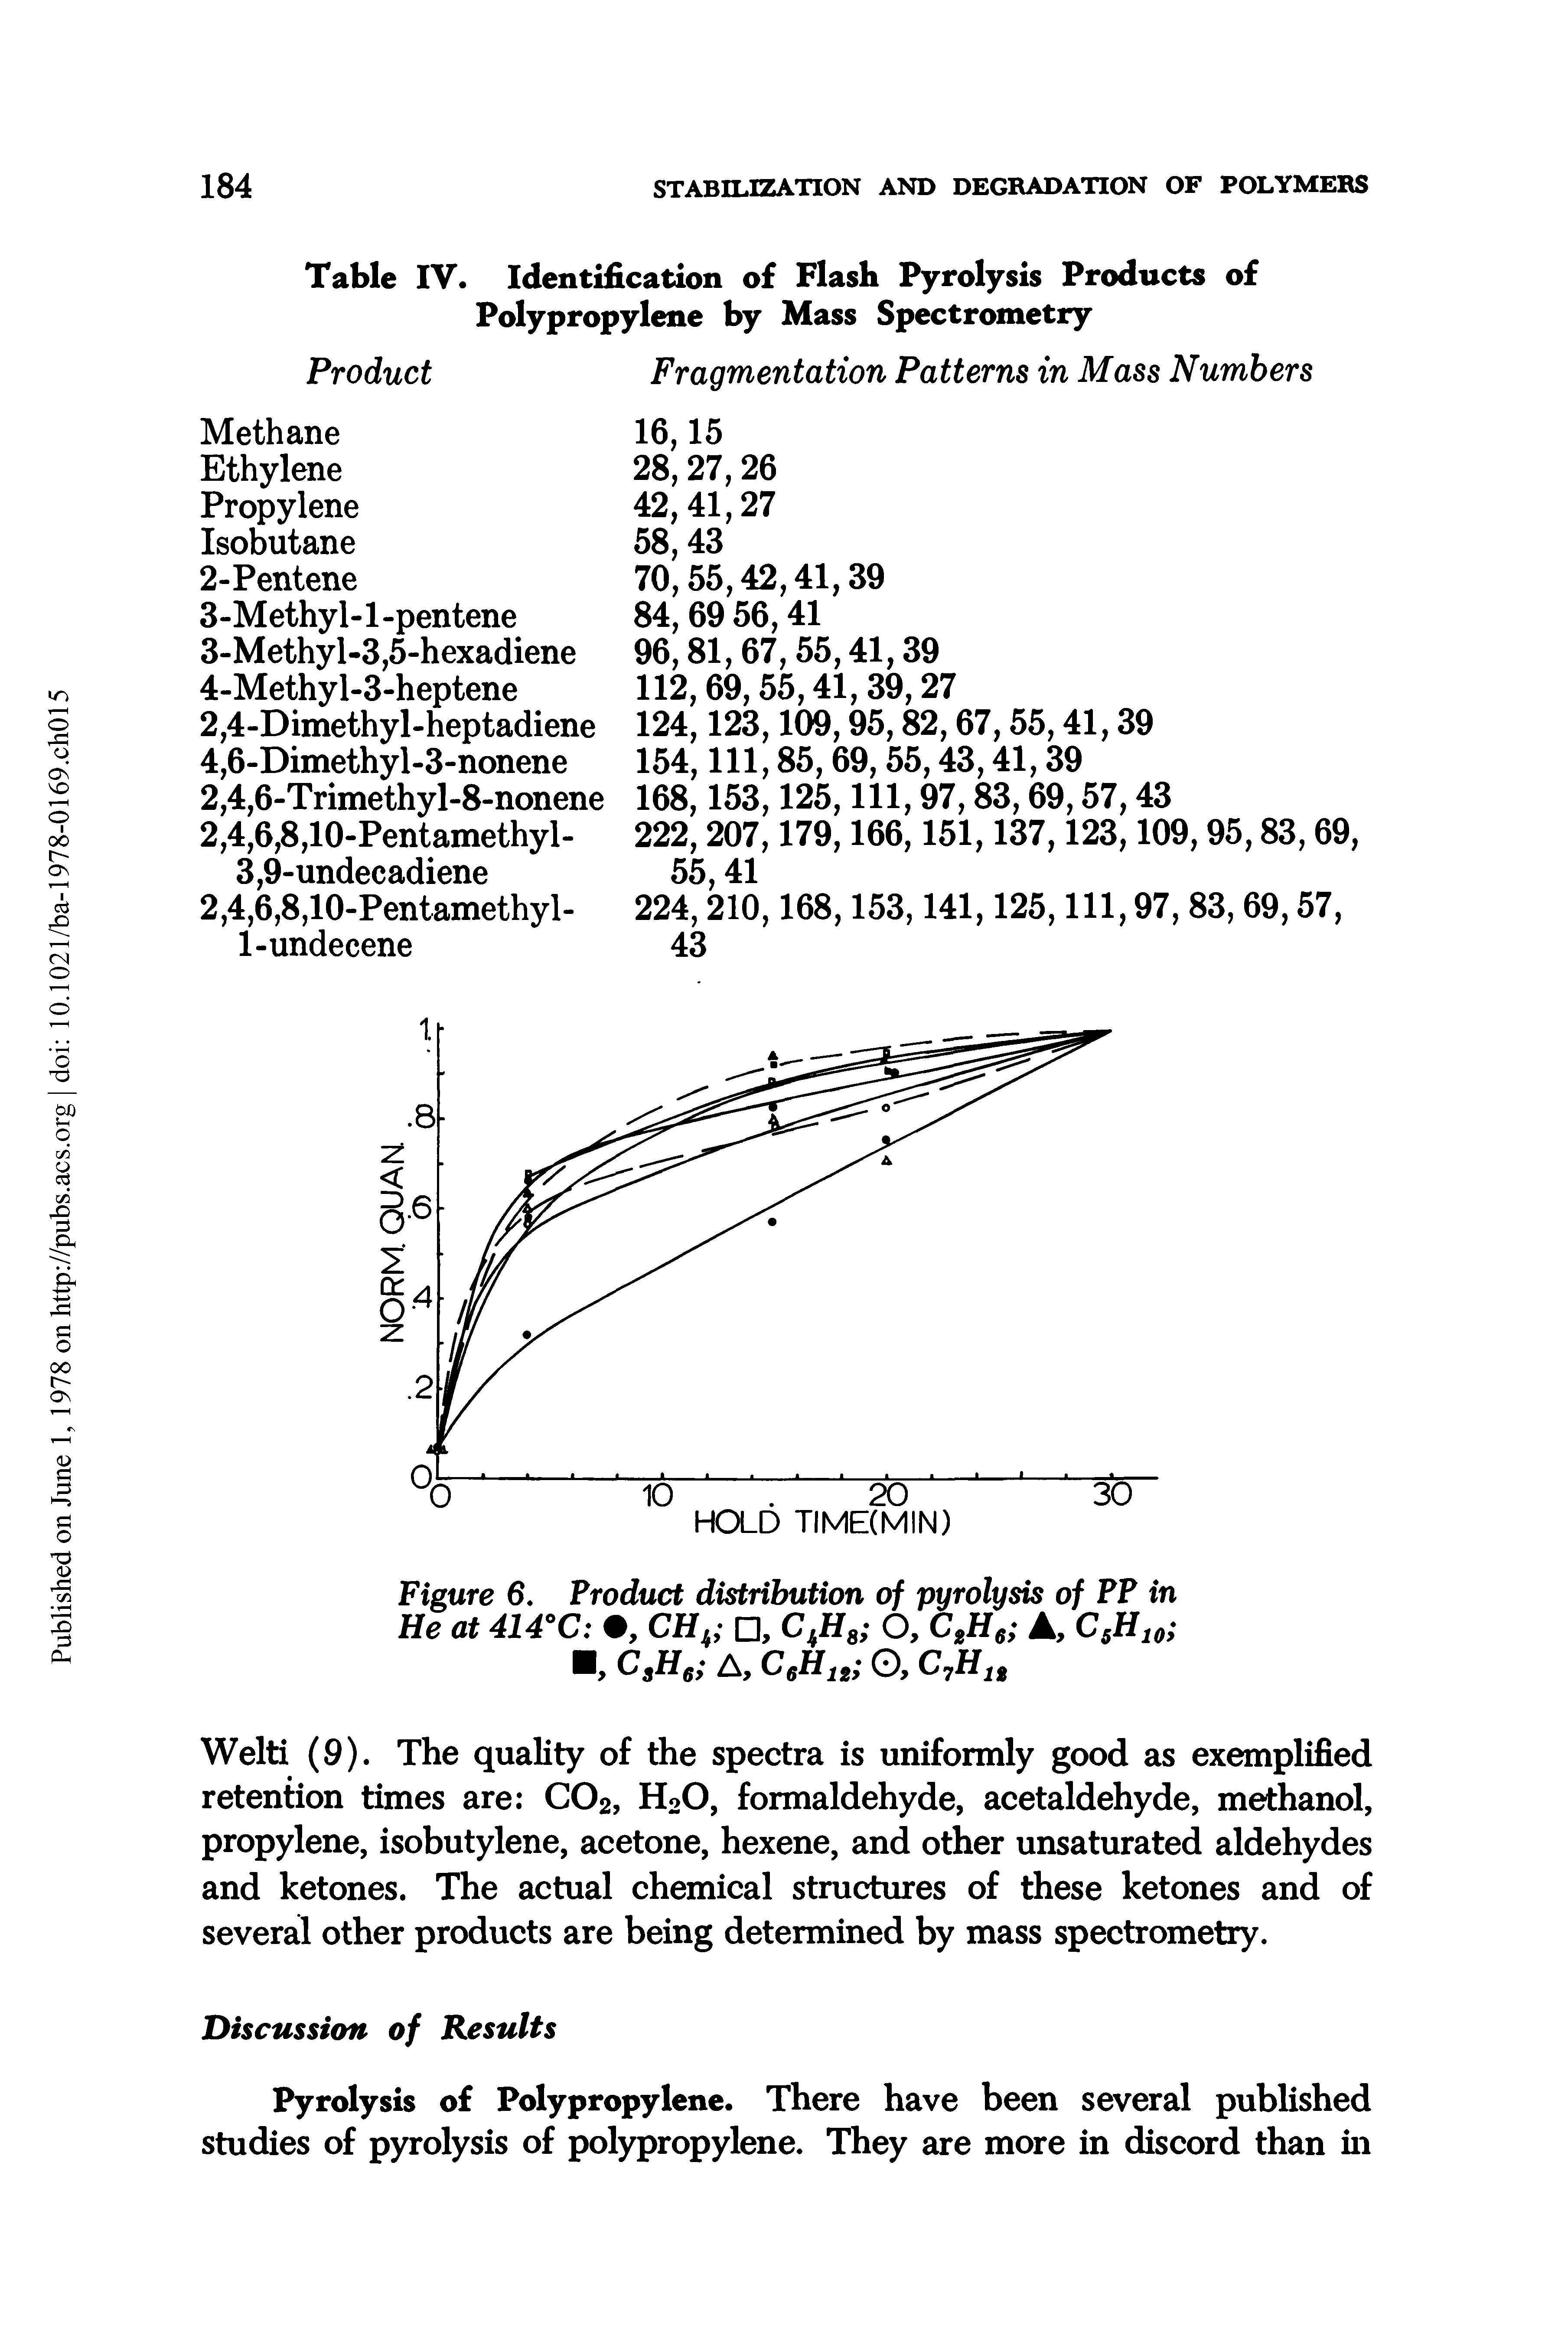 Figure 6. Product distribution of pyrolysis of PP in He at 414°C , C% , ChH8 O, C2H6 A, C5H10 s 6> A, C6H12 O, C7H12...